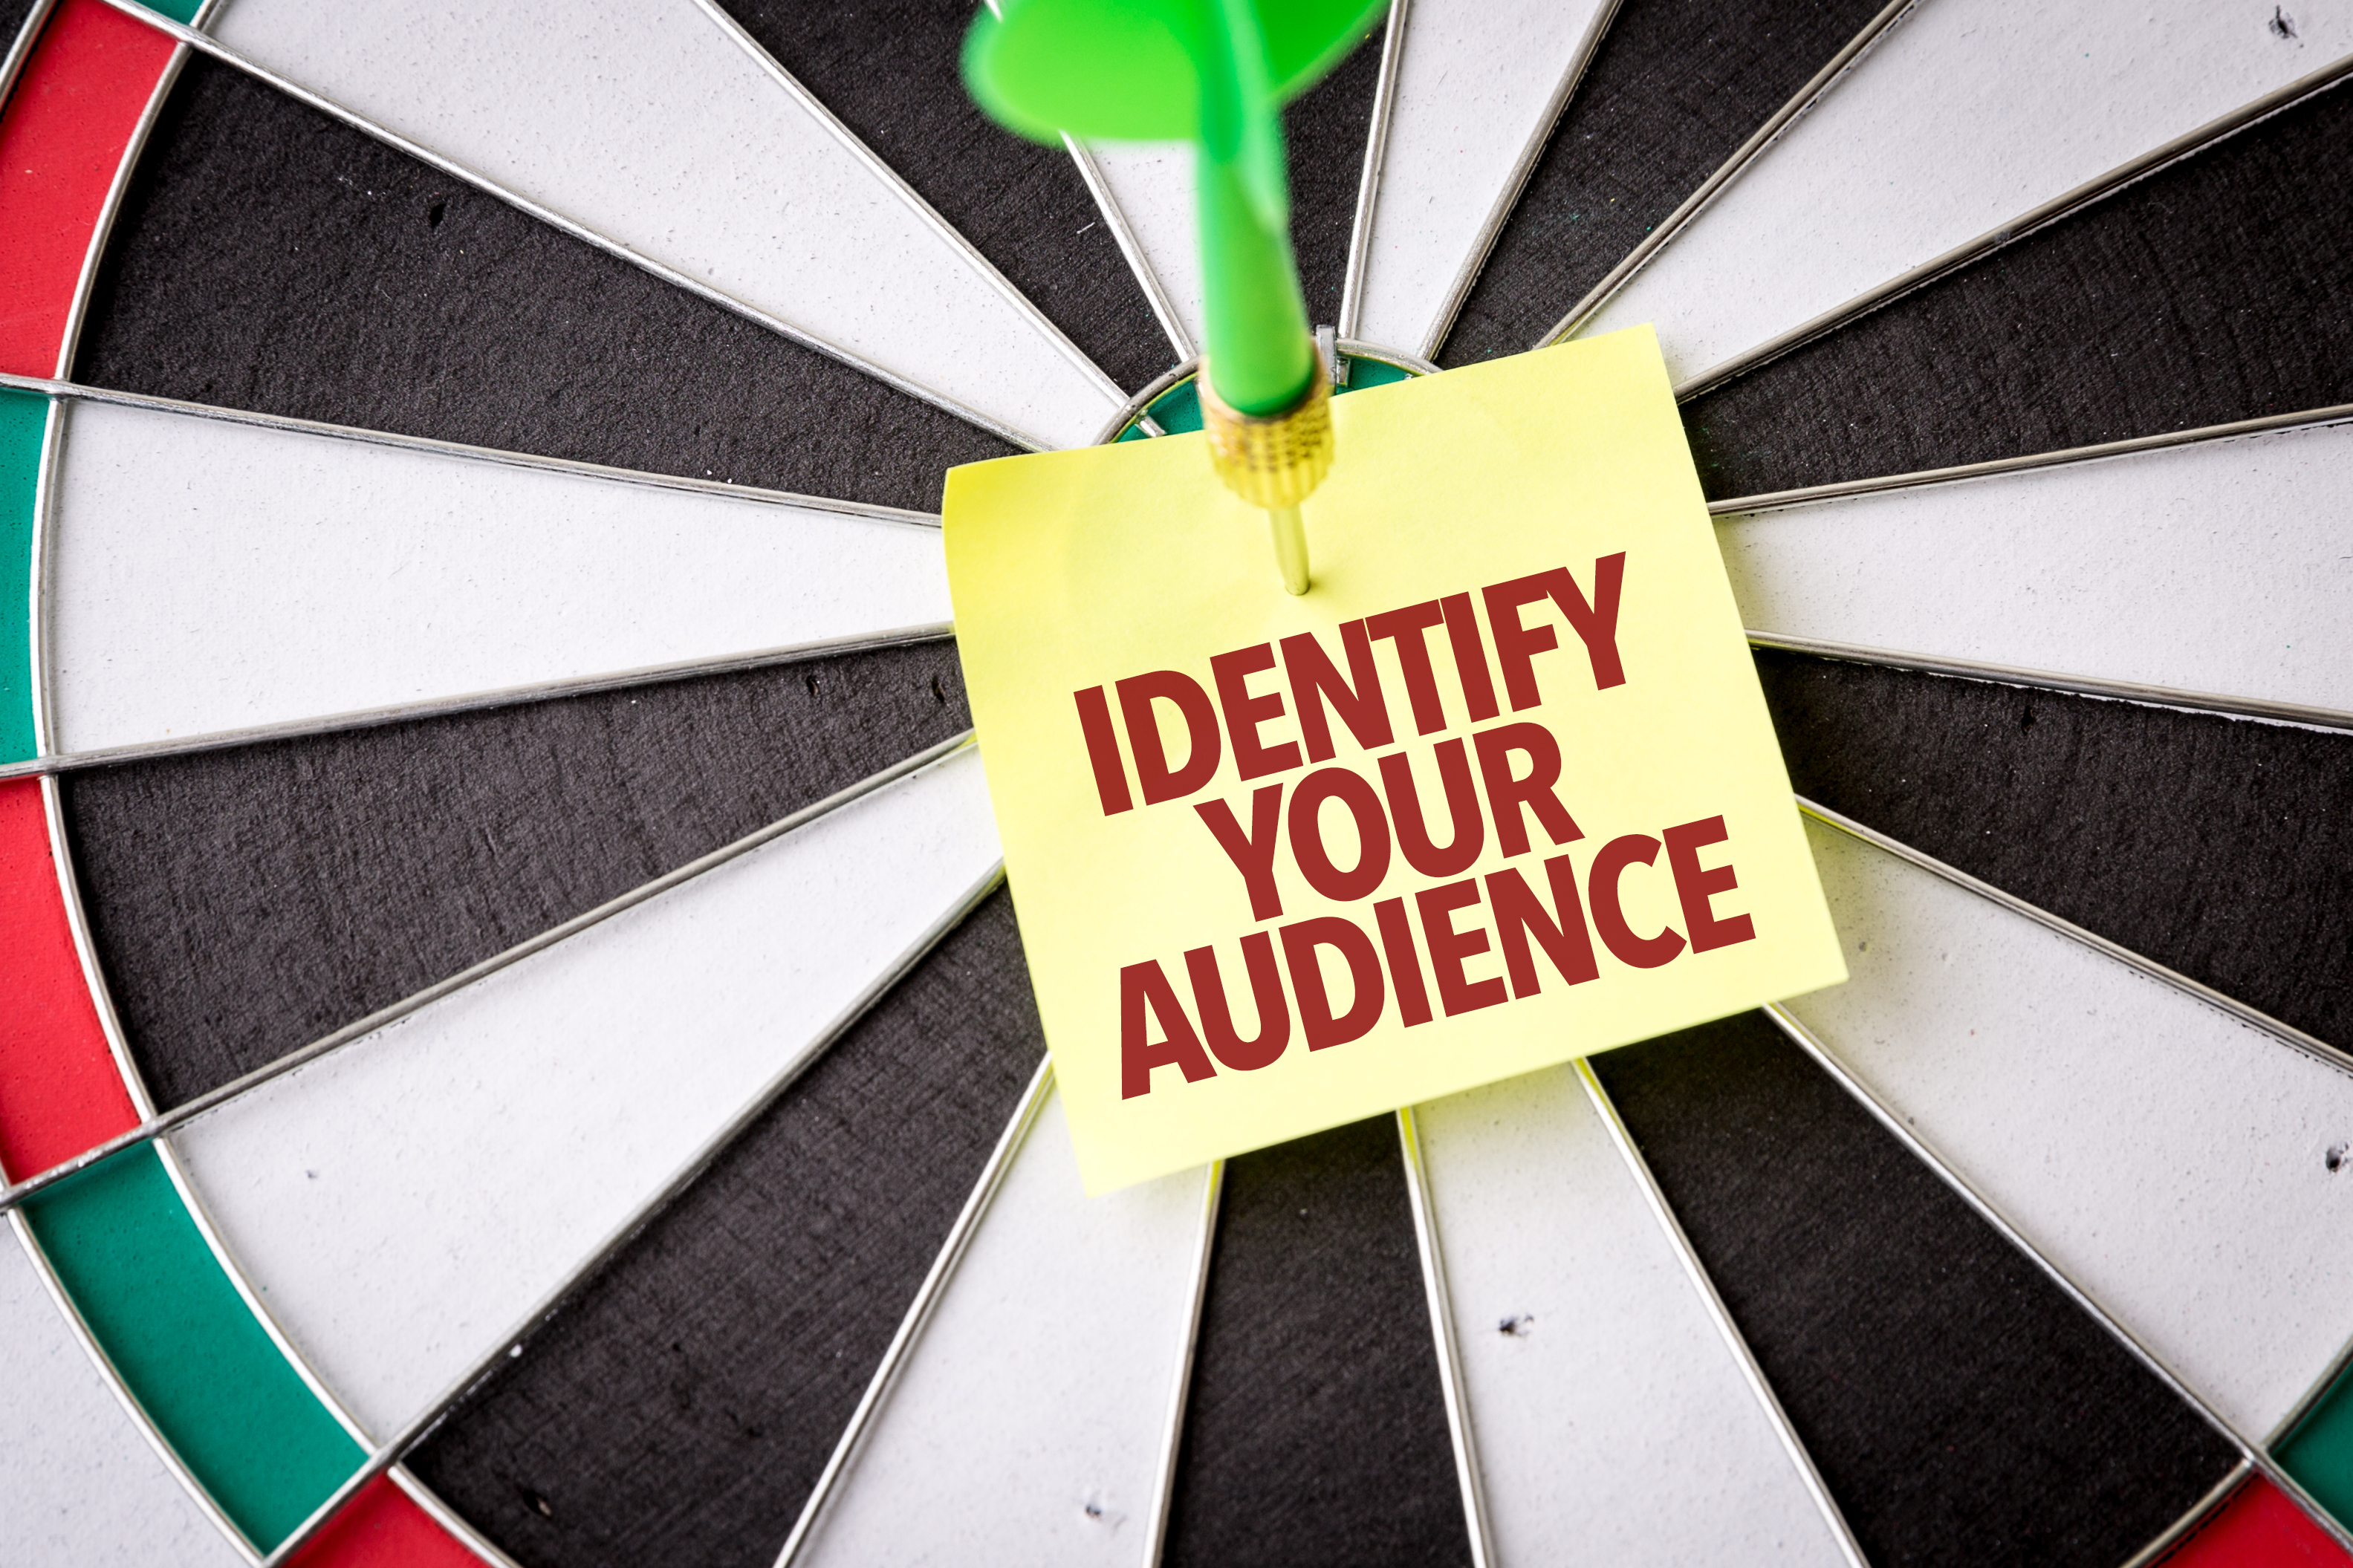 Target demographic image, Identify your audience on a target